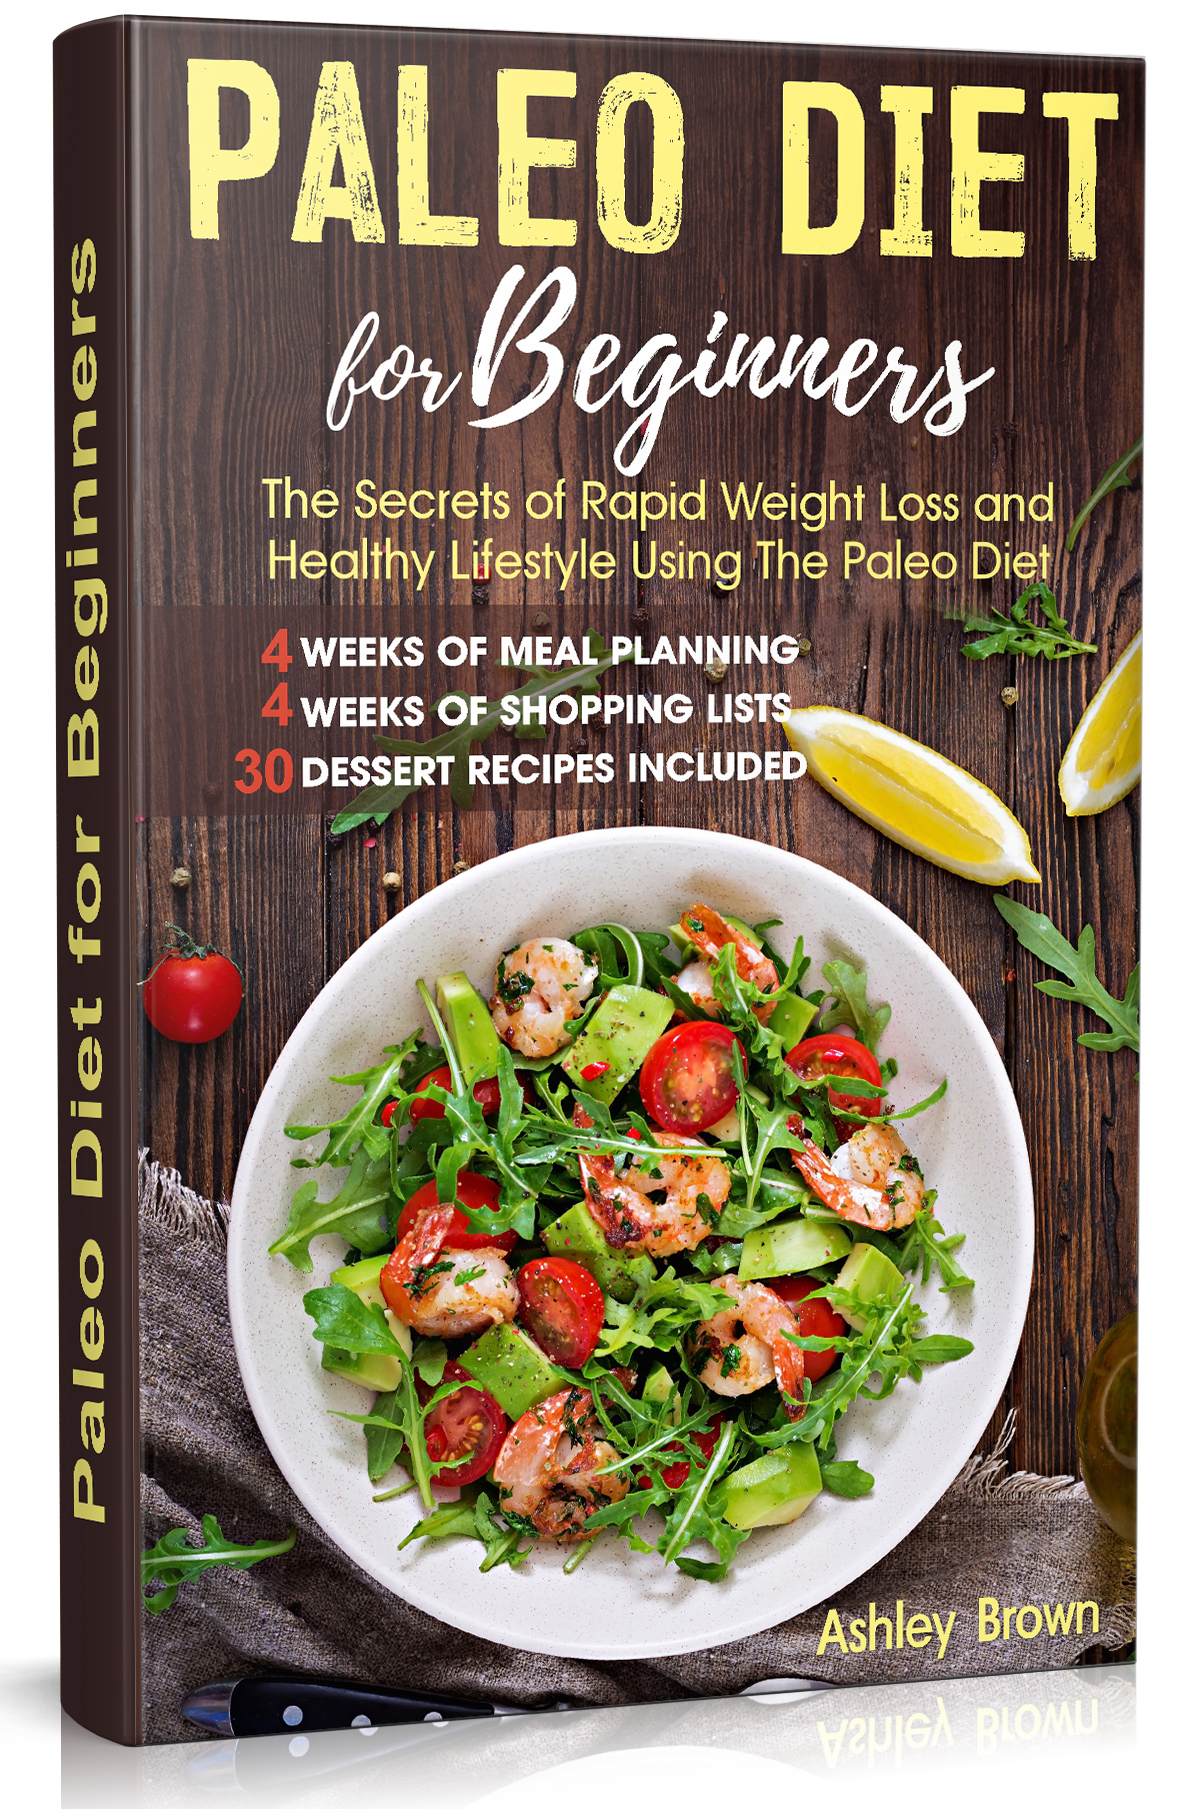 FREE: PALEO DIET FOR BEGINNERS: THE SECRETS OF RAPID WEIGHT LOSS AND A HEALTHY LIFESTYLE USING THE PALEO DIET by Ashley Brown